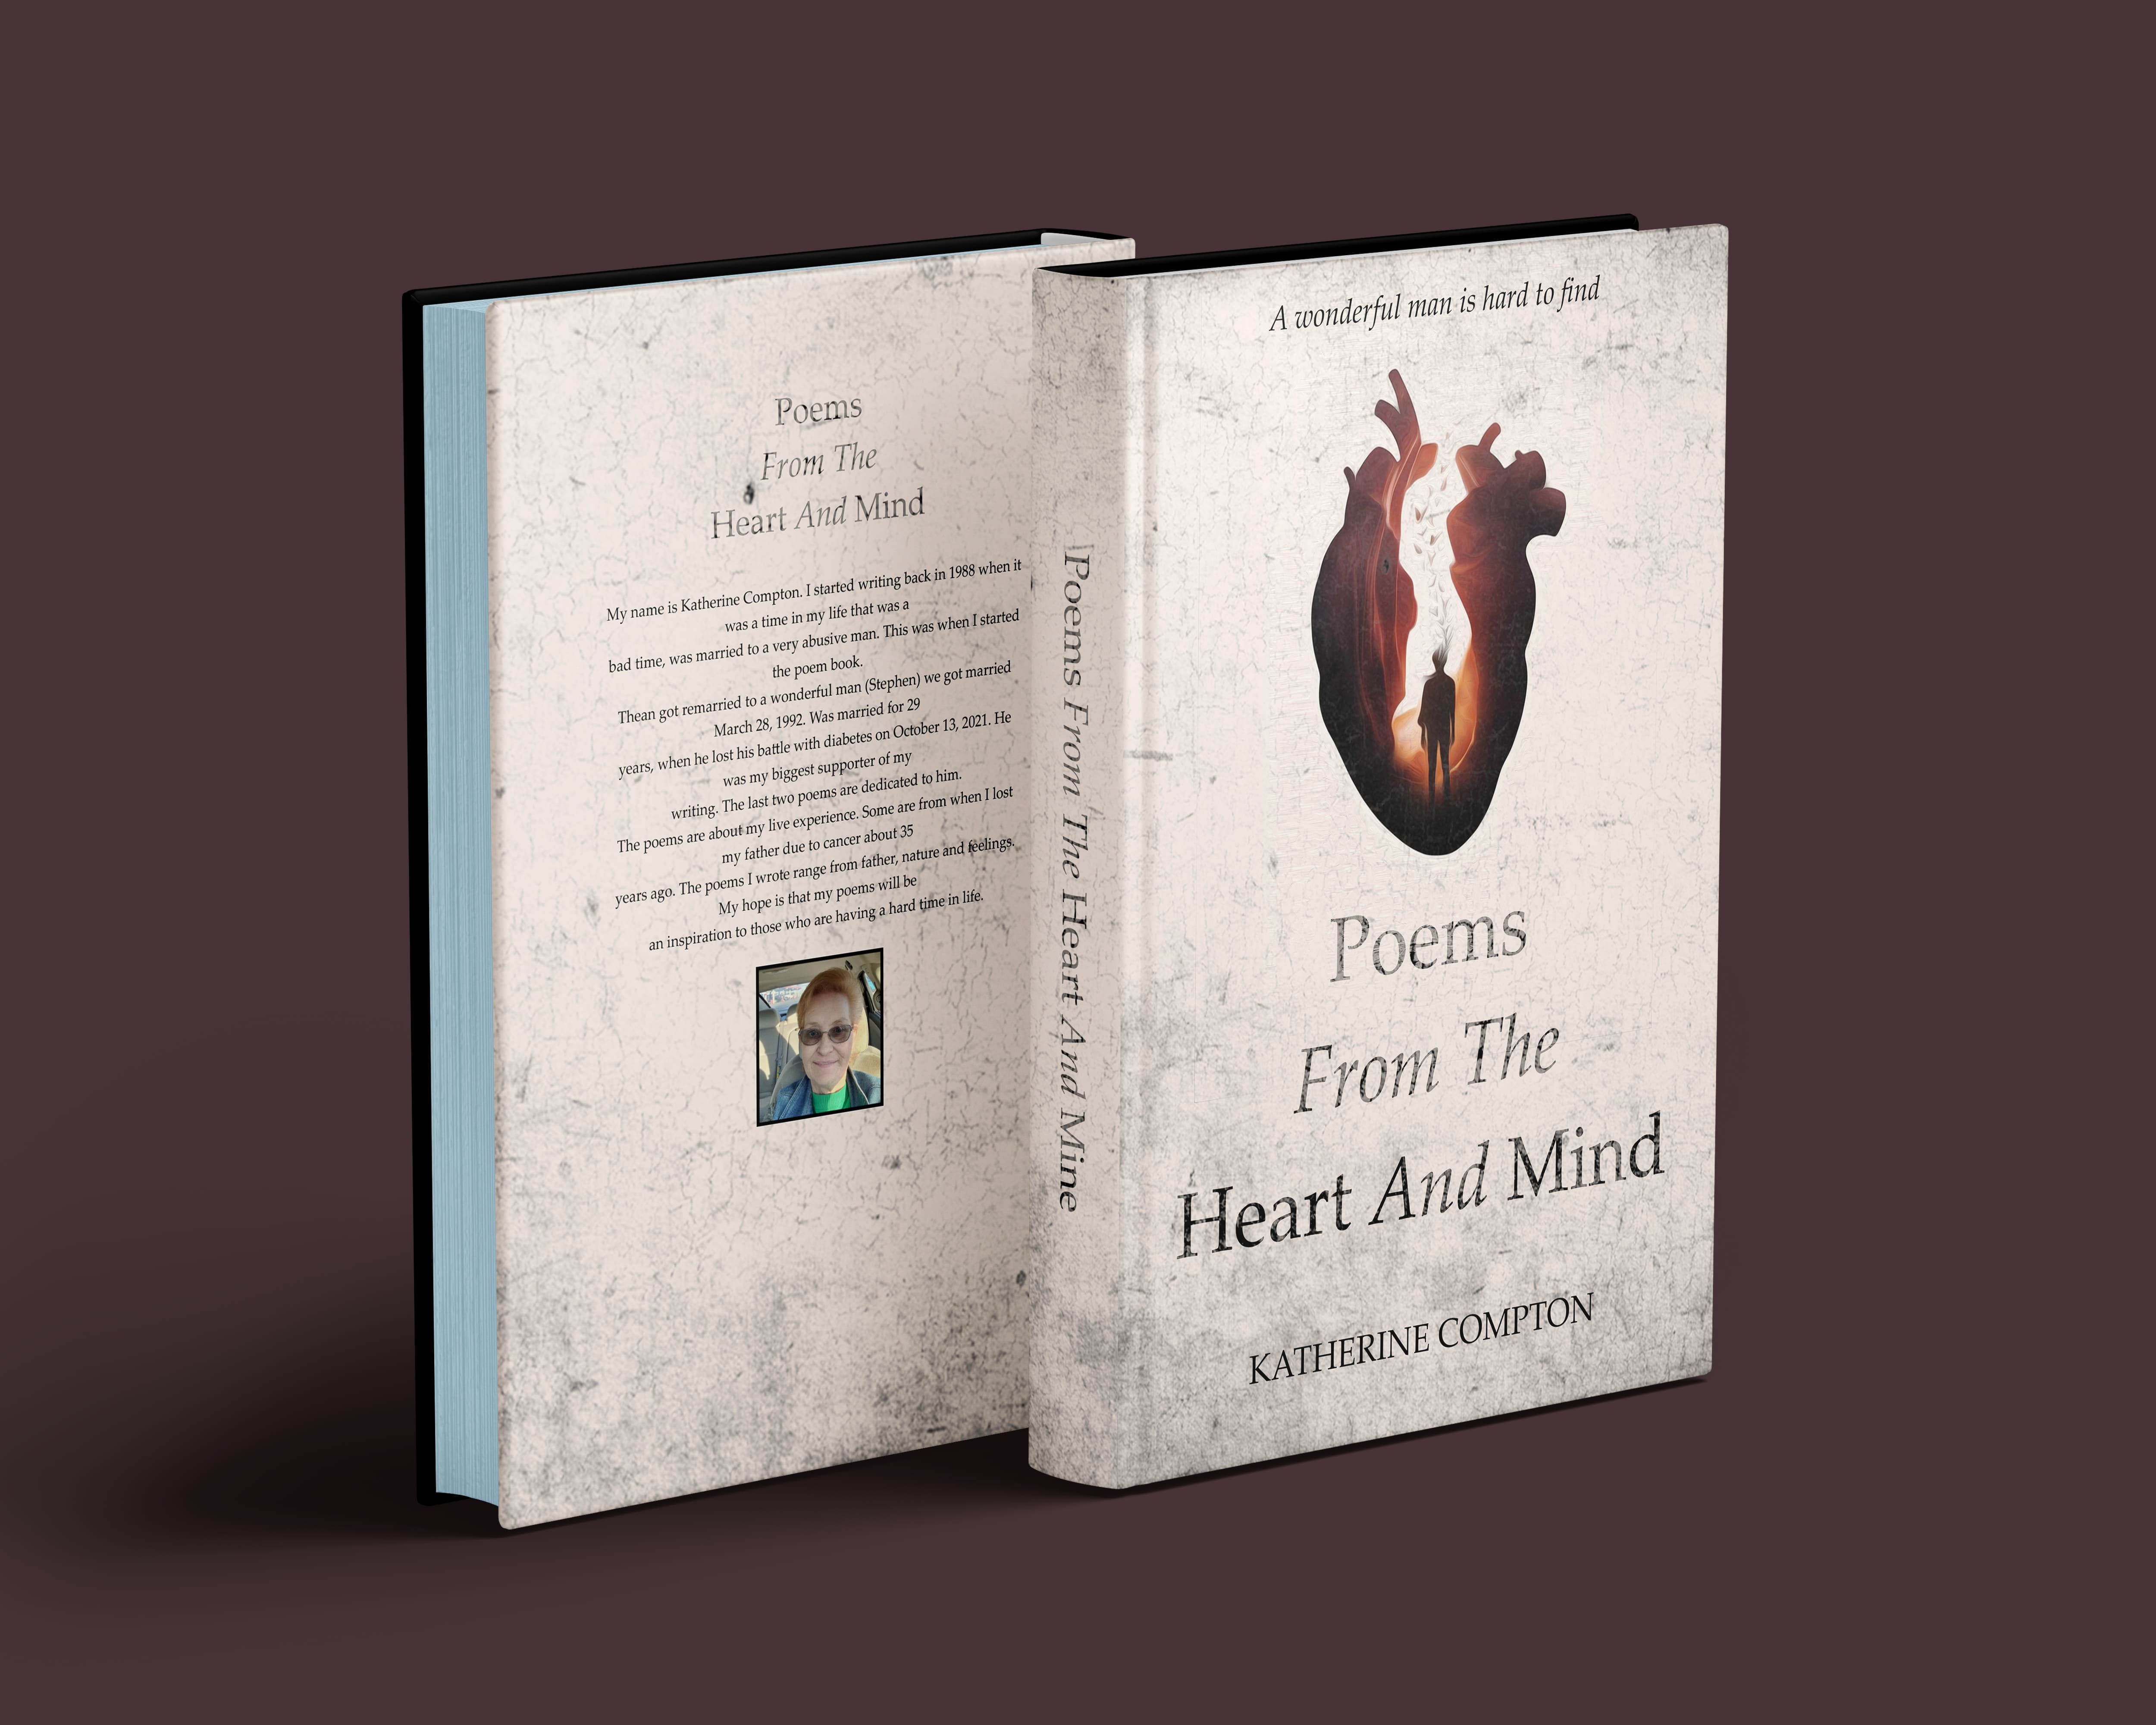 Book cover for 'Poems from the Heart and Mind': A vibrant design with a heart-shaped motif, symbolizing the emotional depth and intellectual creativity within